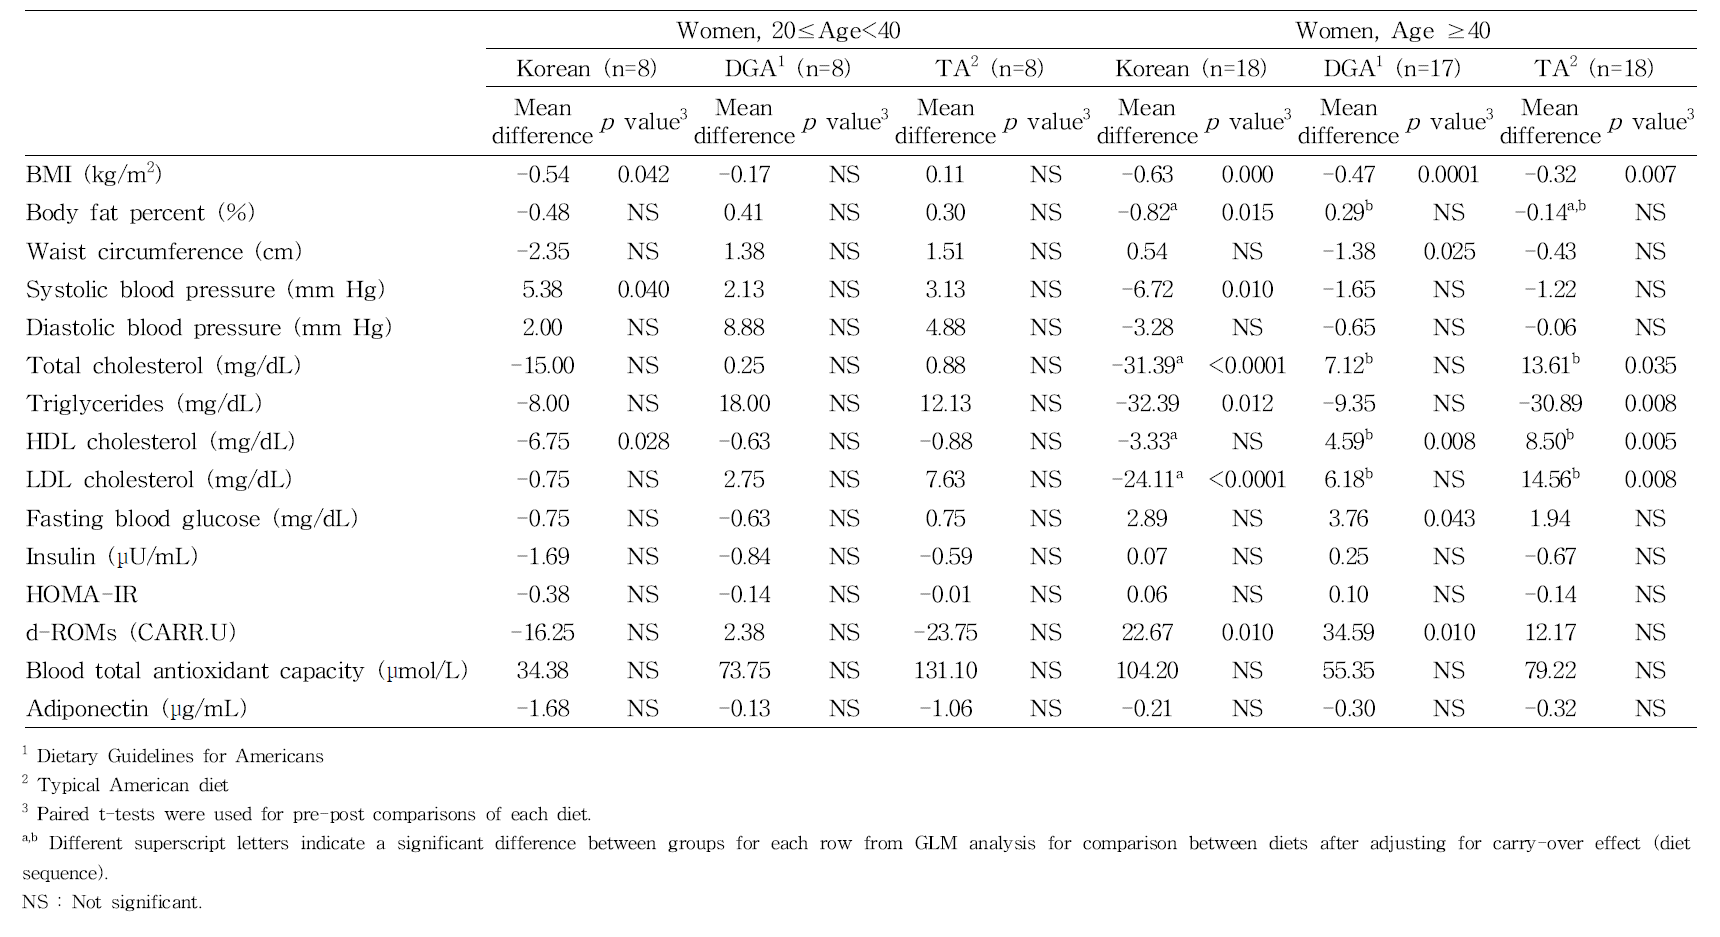 Changes in anthropometric and biochemical parameters by sex and age group according to experimental diet (Continued)